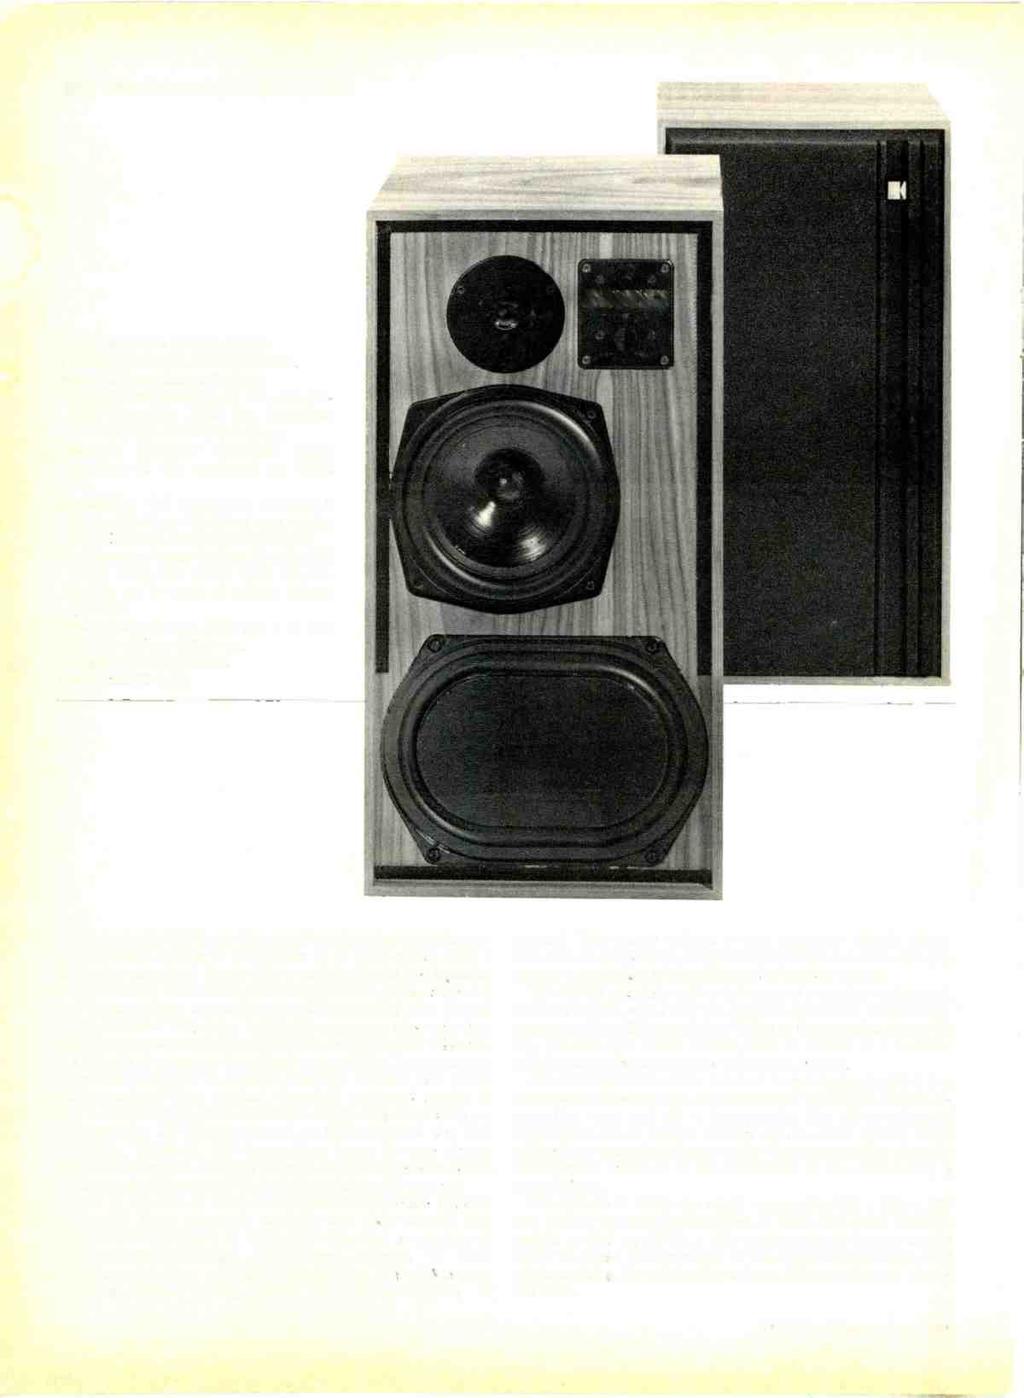 KEF 104aB Loudspeaker System Manufacturer's Specifications Frequency Range: 30 to 40,000 Hz. Nominal Impedance: 8 ohms.